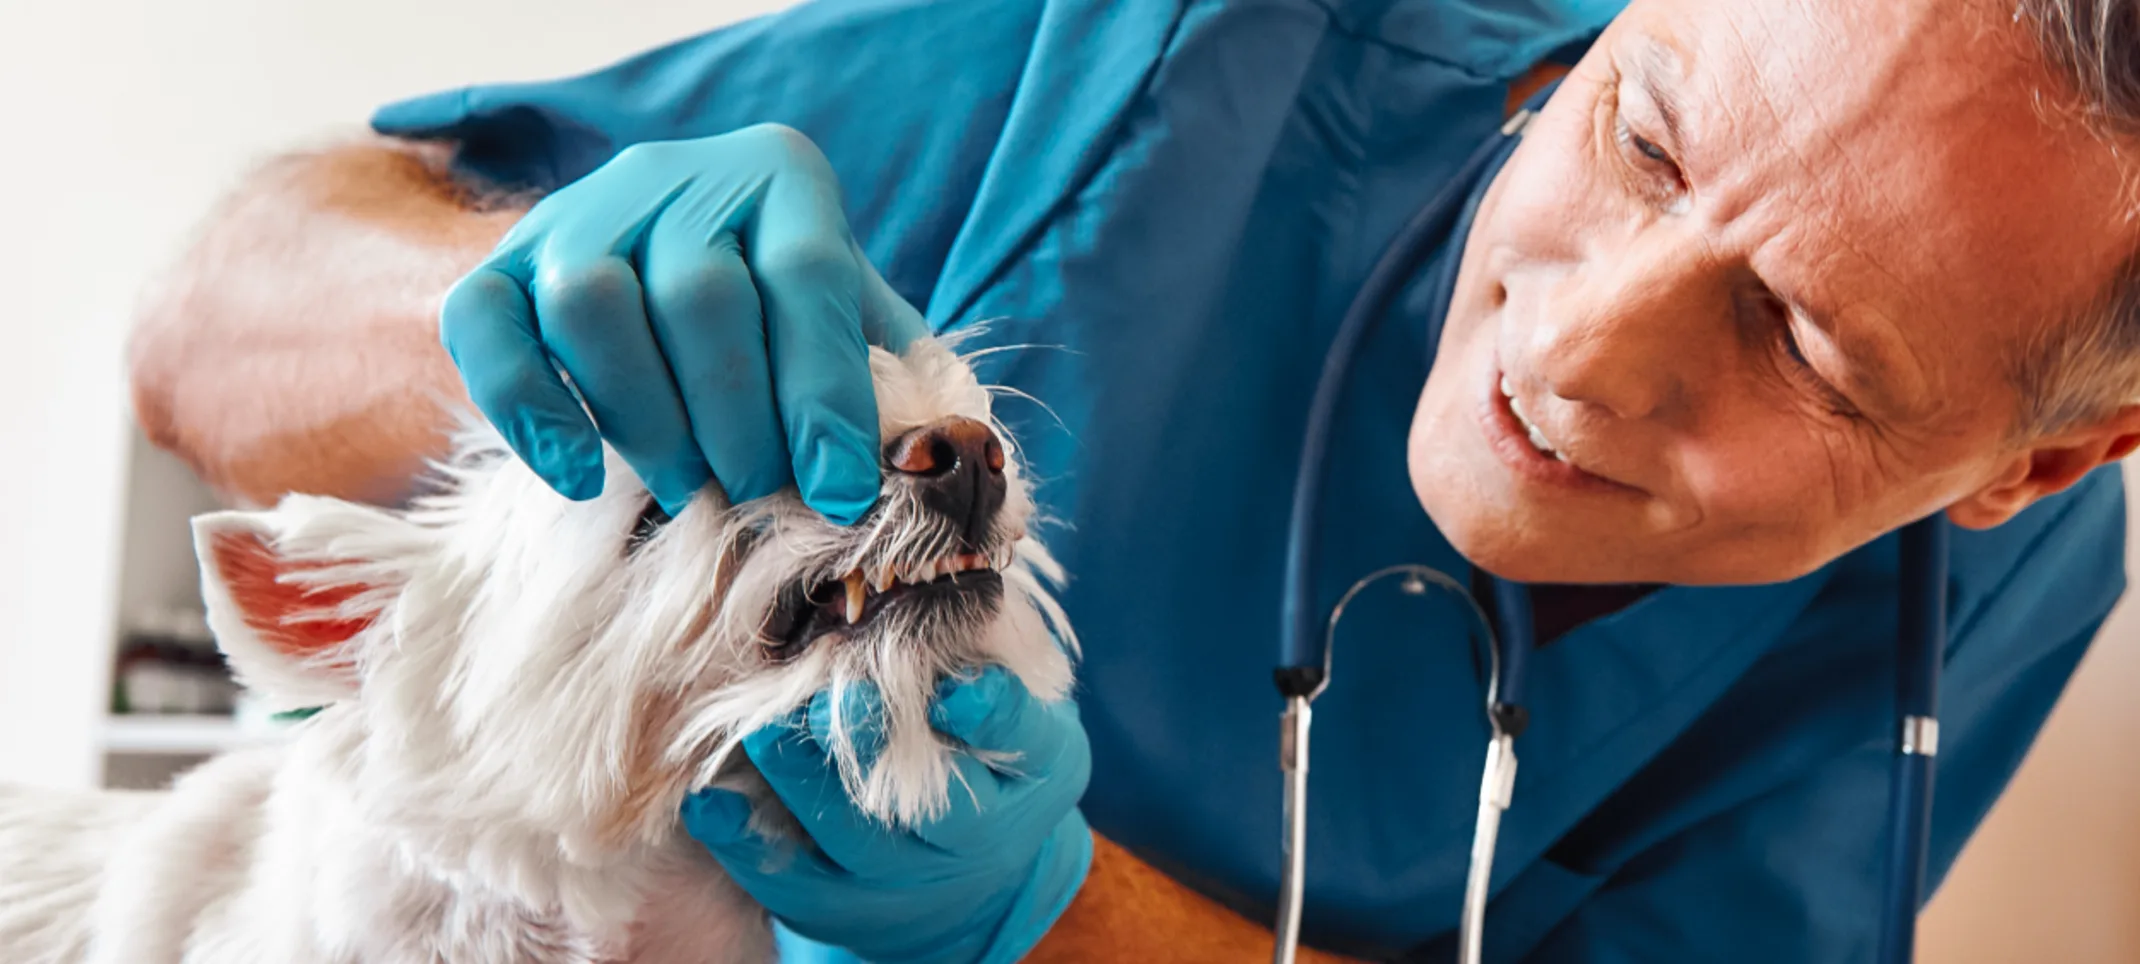 Male Veterinarian is checking a white dog's teeth.